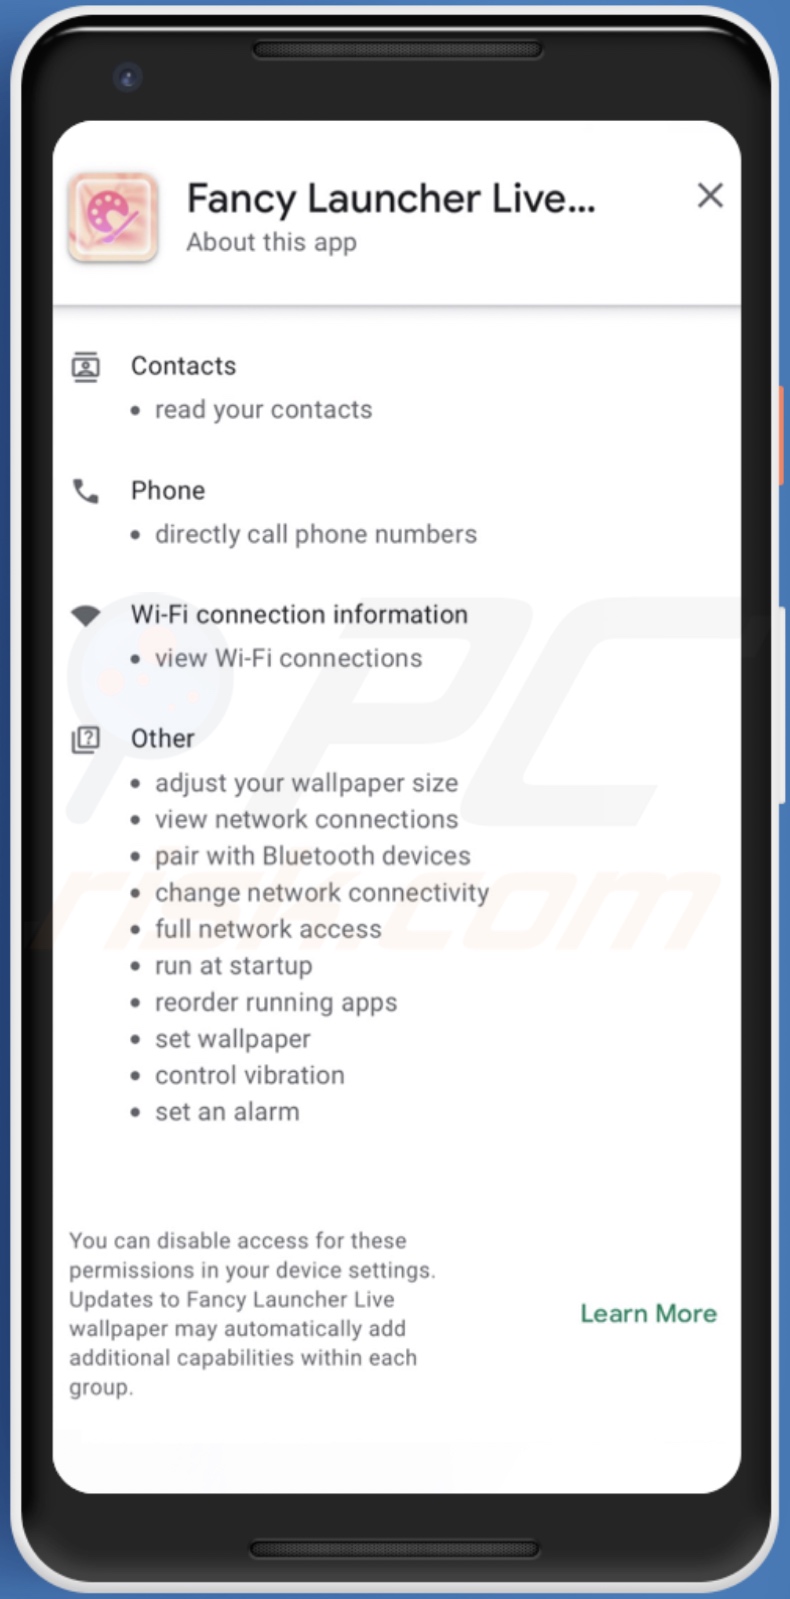 Permissions asked by Harly malware (Fancy Launcher Live wallpaper - disguise)